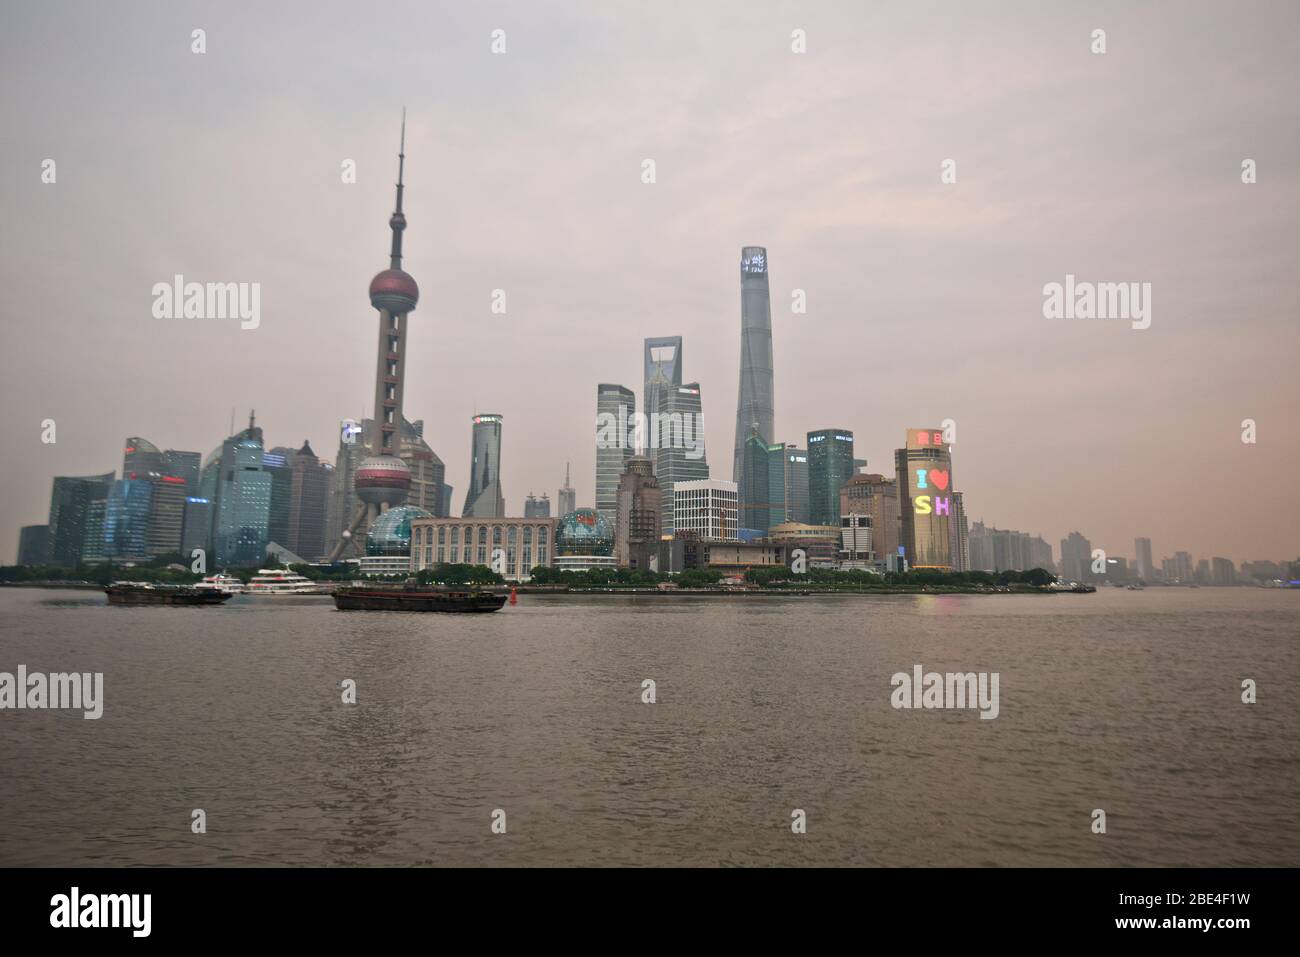 Shanghai's Pudong skyline towers over the Huangpu River, view from The Bund. China Stock Photo